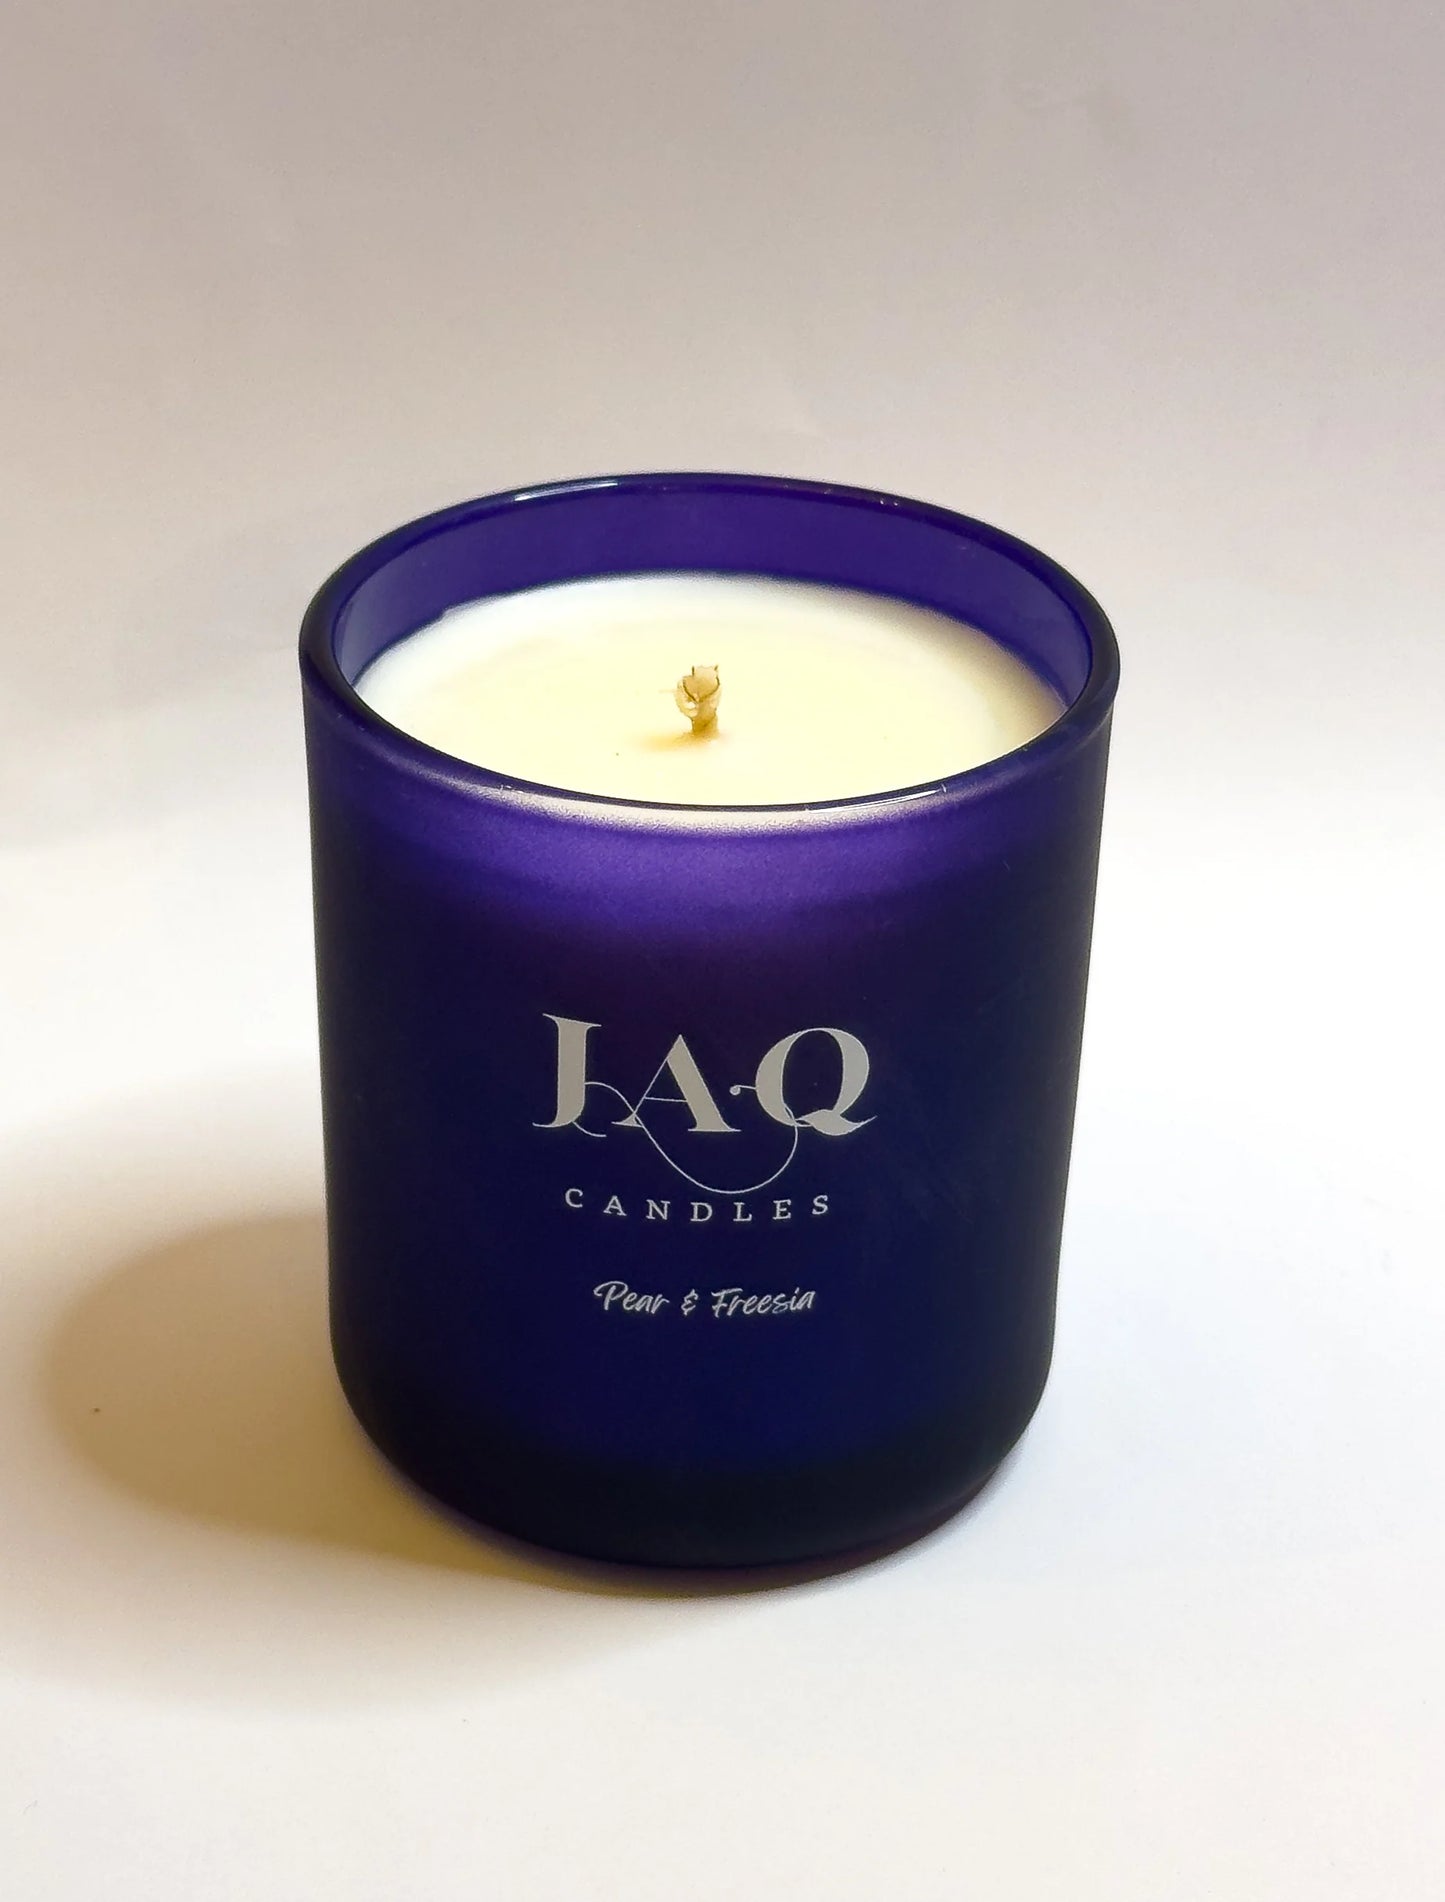 Pear & Freesia Candle by JAQ Candles